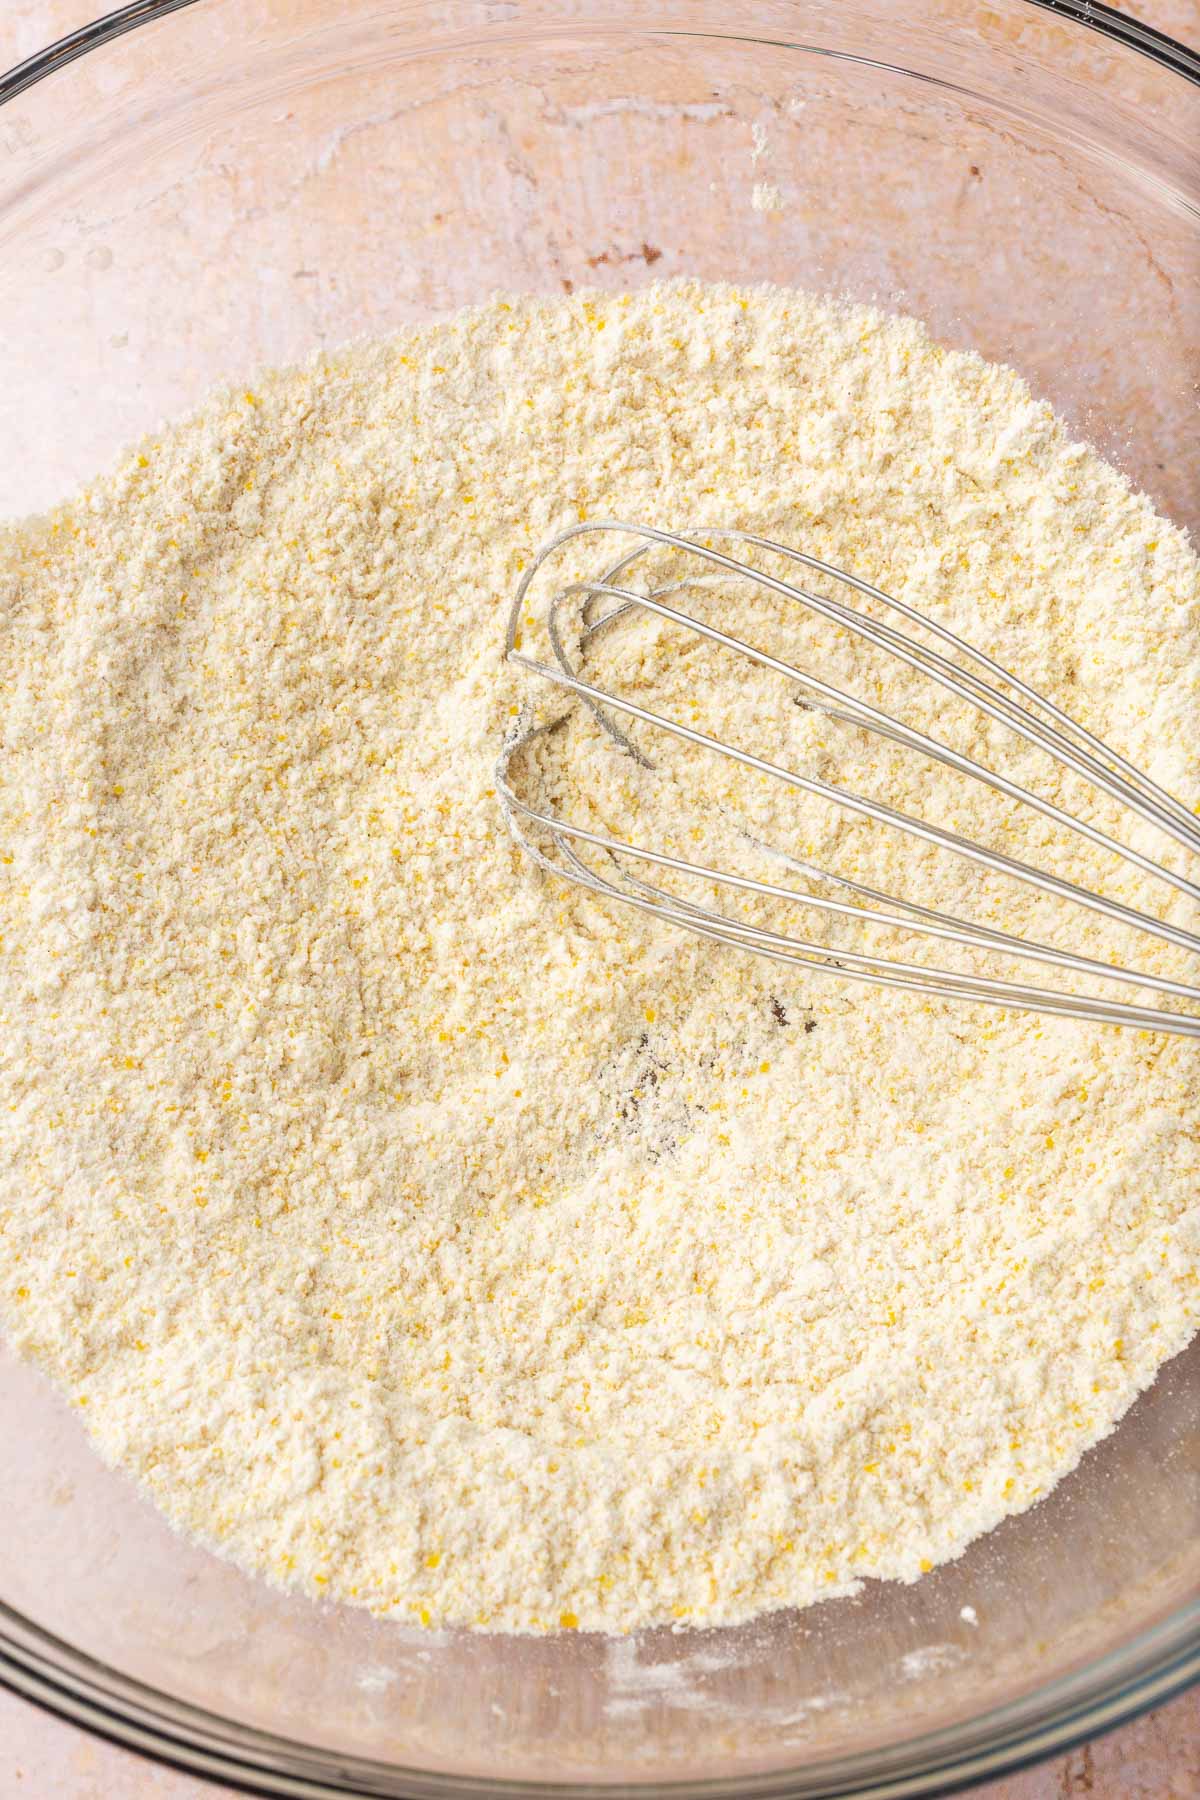 A glass bowl with a gluten-free flour mixture and a wire whisk.